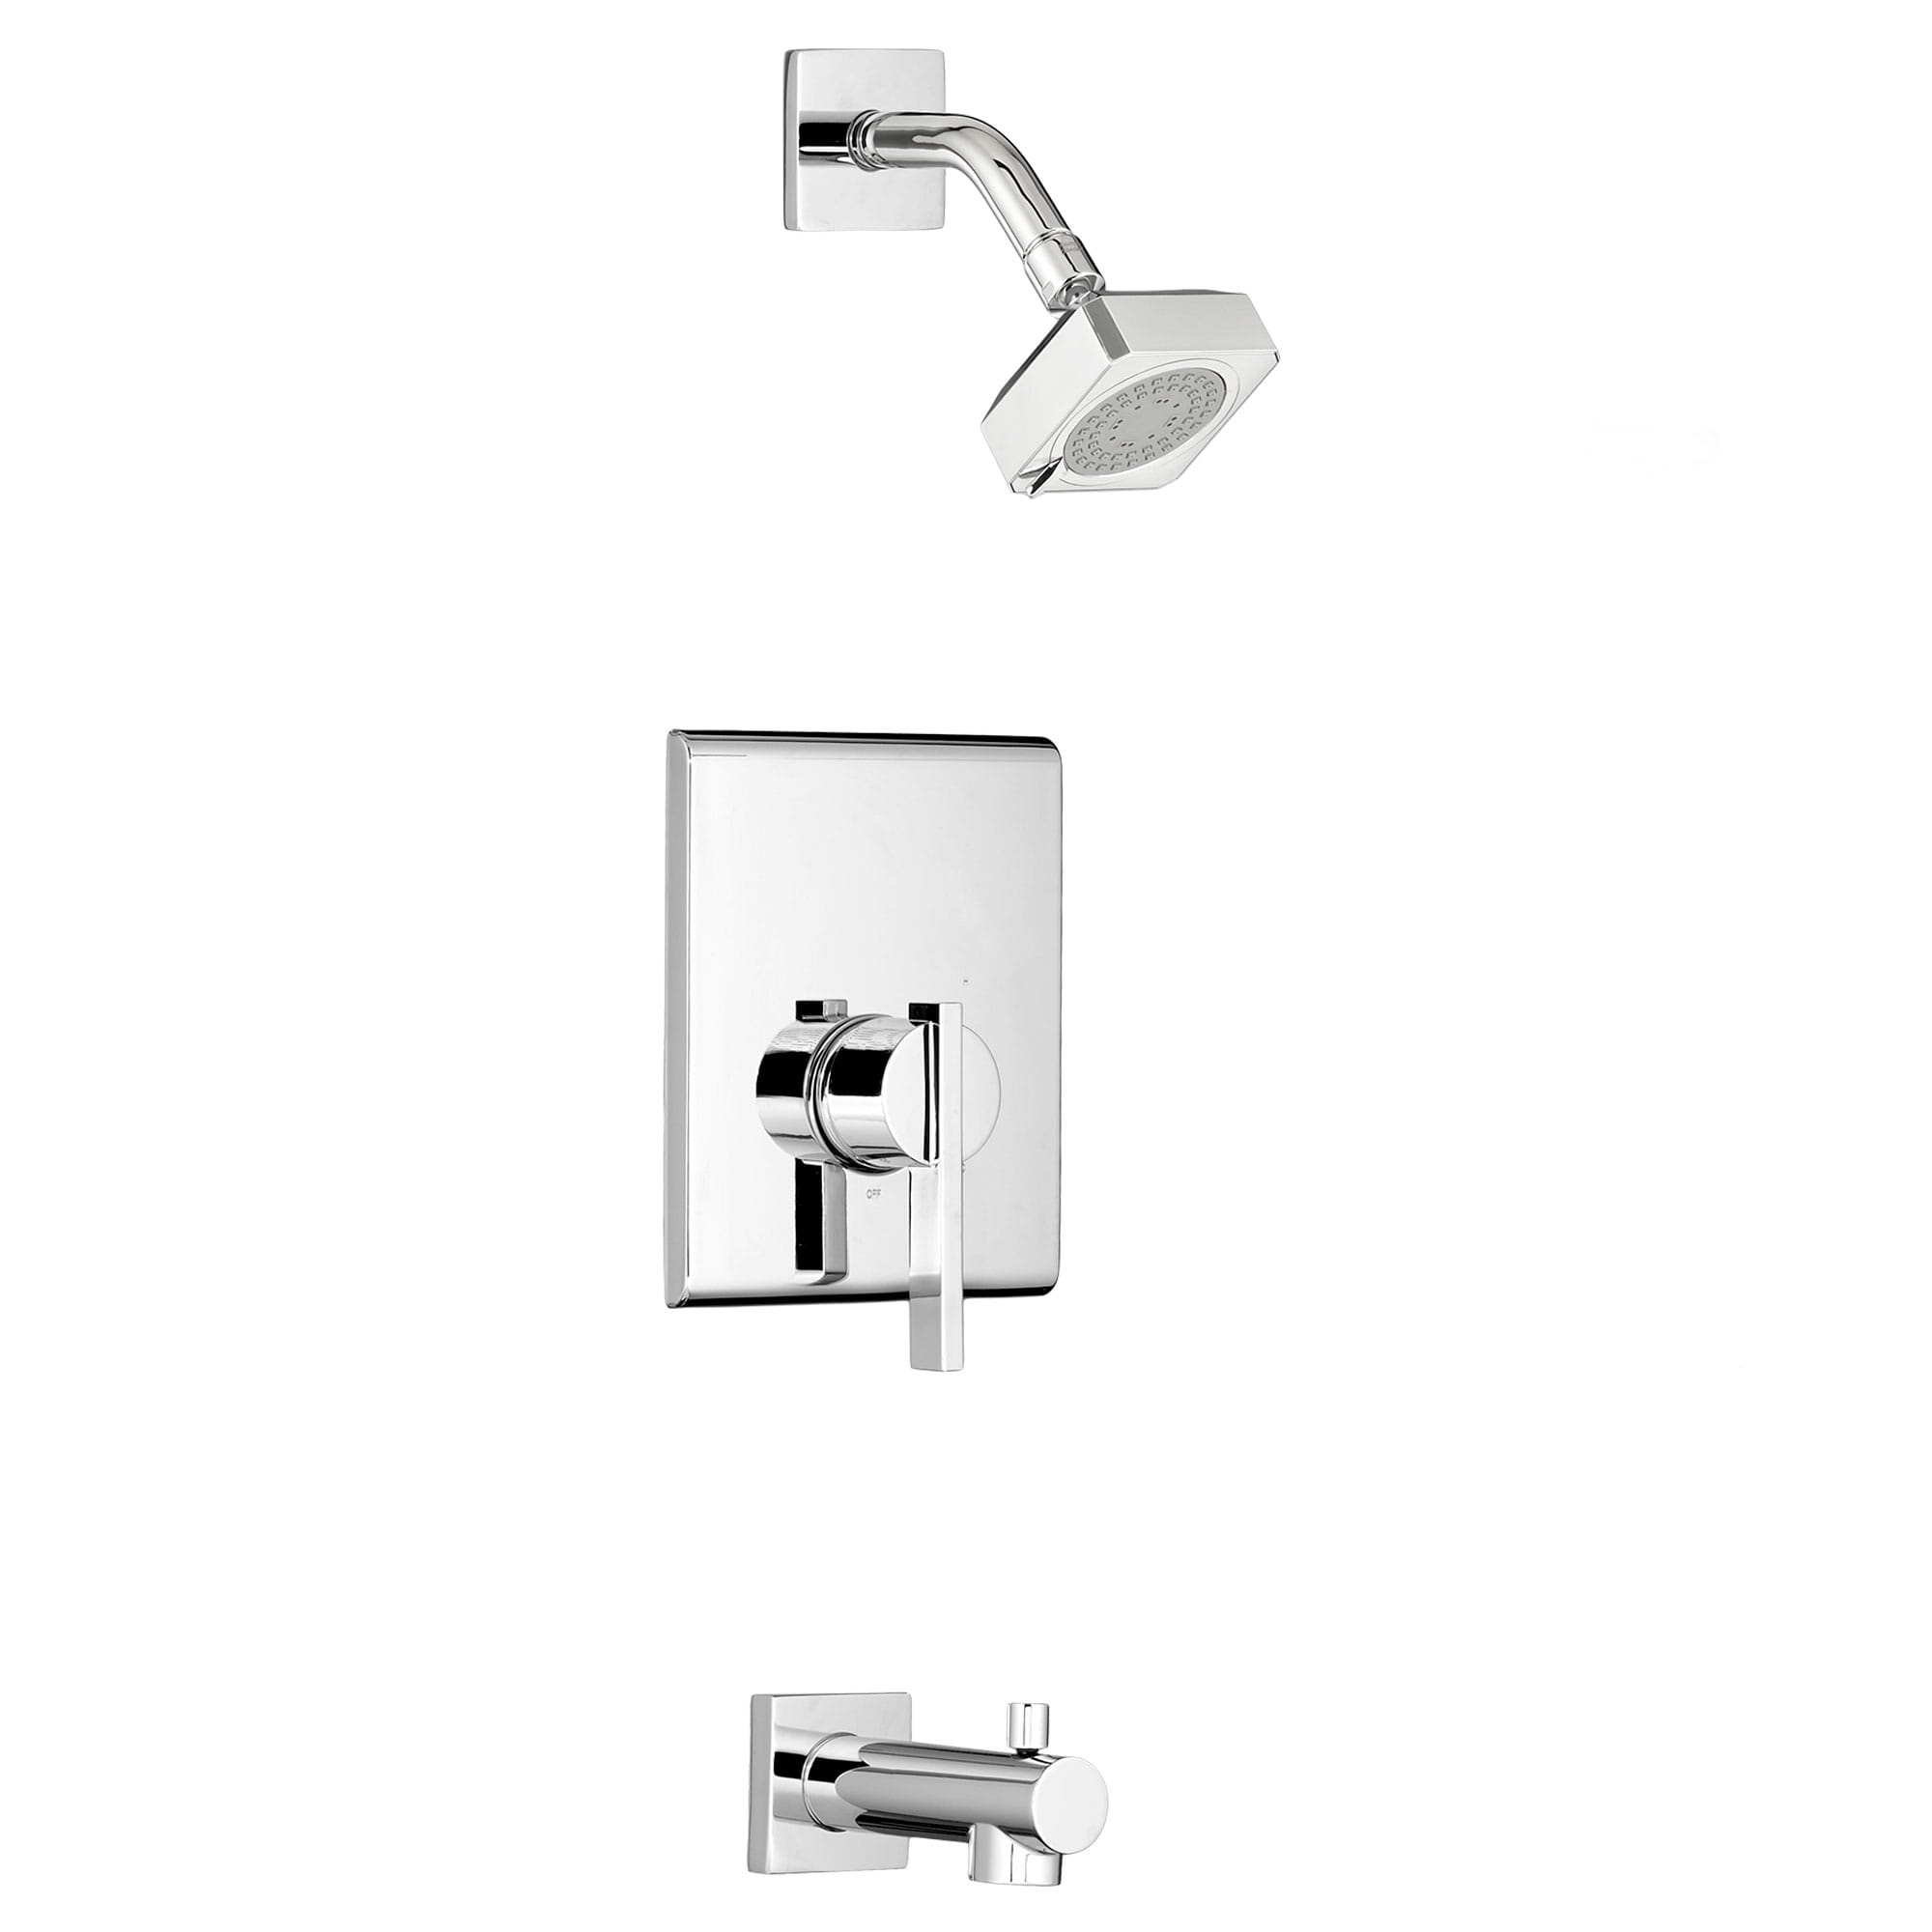 Times Square 175 gpm 66 L min Tub and Shower Trim Kit With Water Saving Showerhead Double Ceramic Pressure Balance Cartridge With Lever Handle CHROME